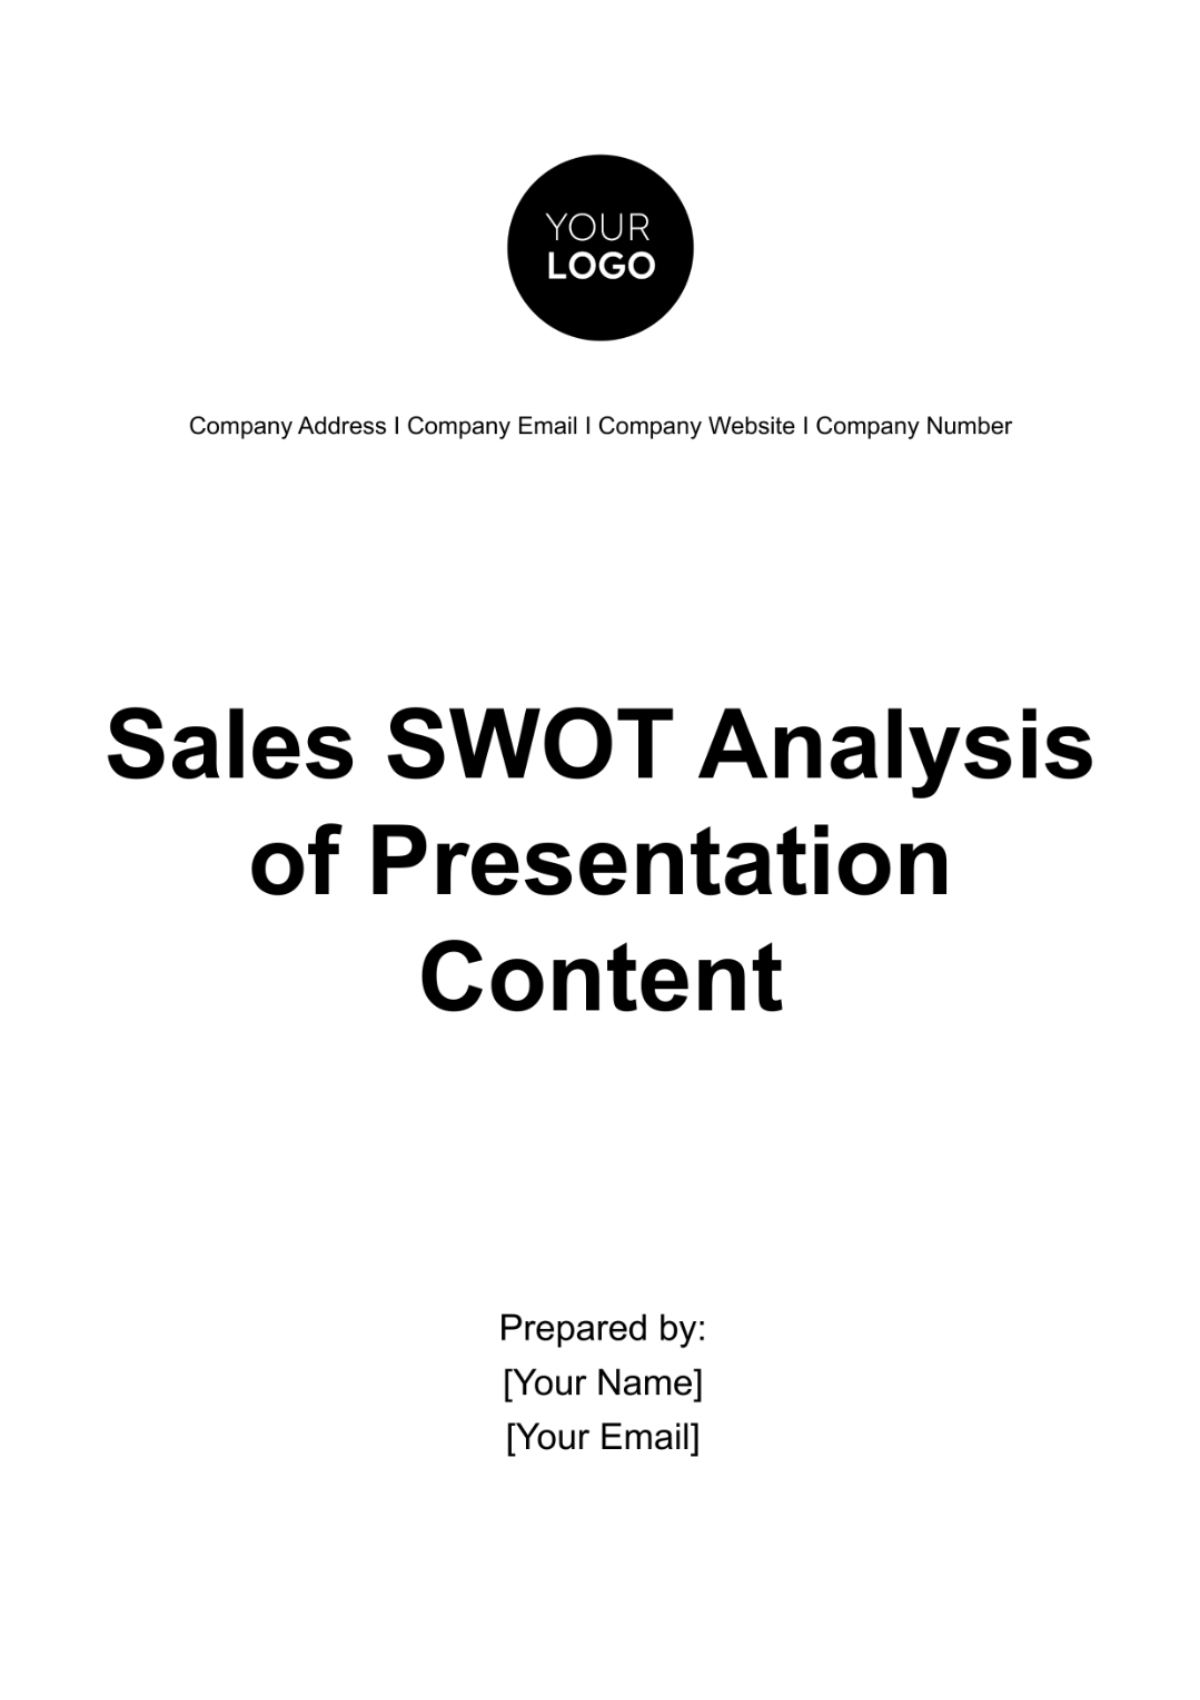 Free Sales SWOT Analysis of Presentation Content Template